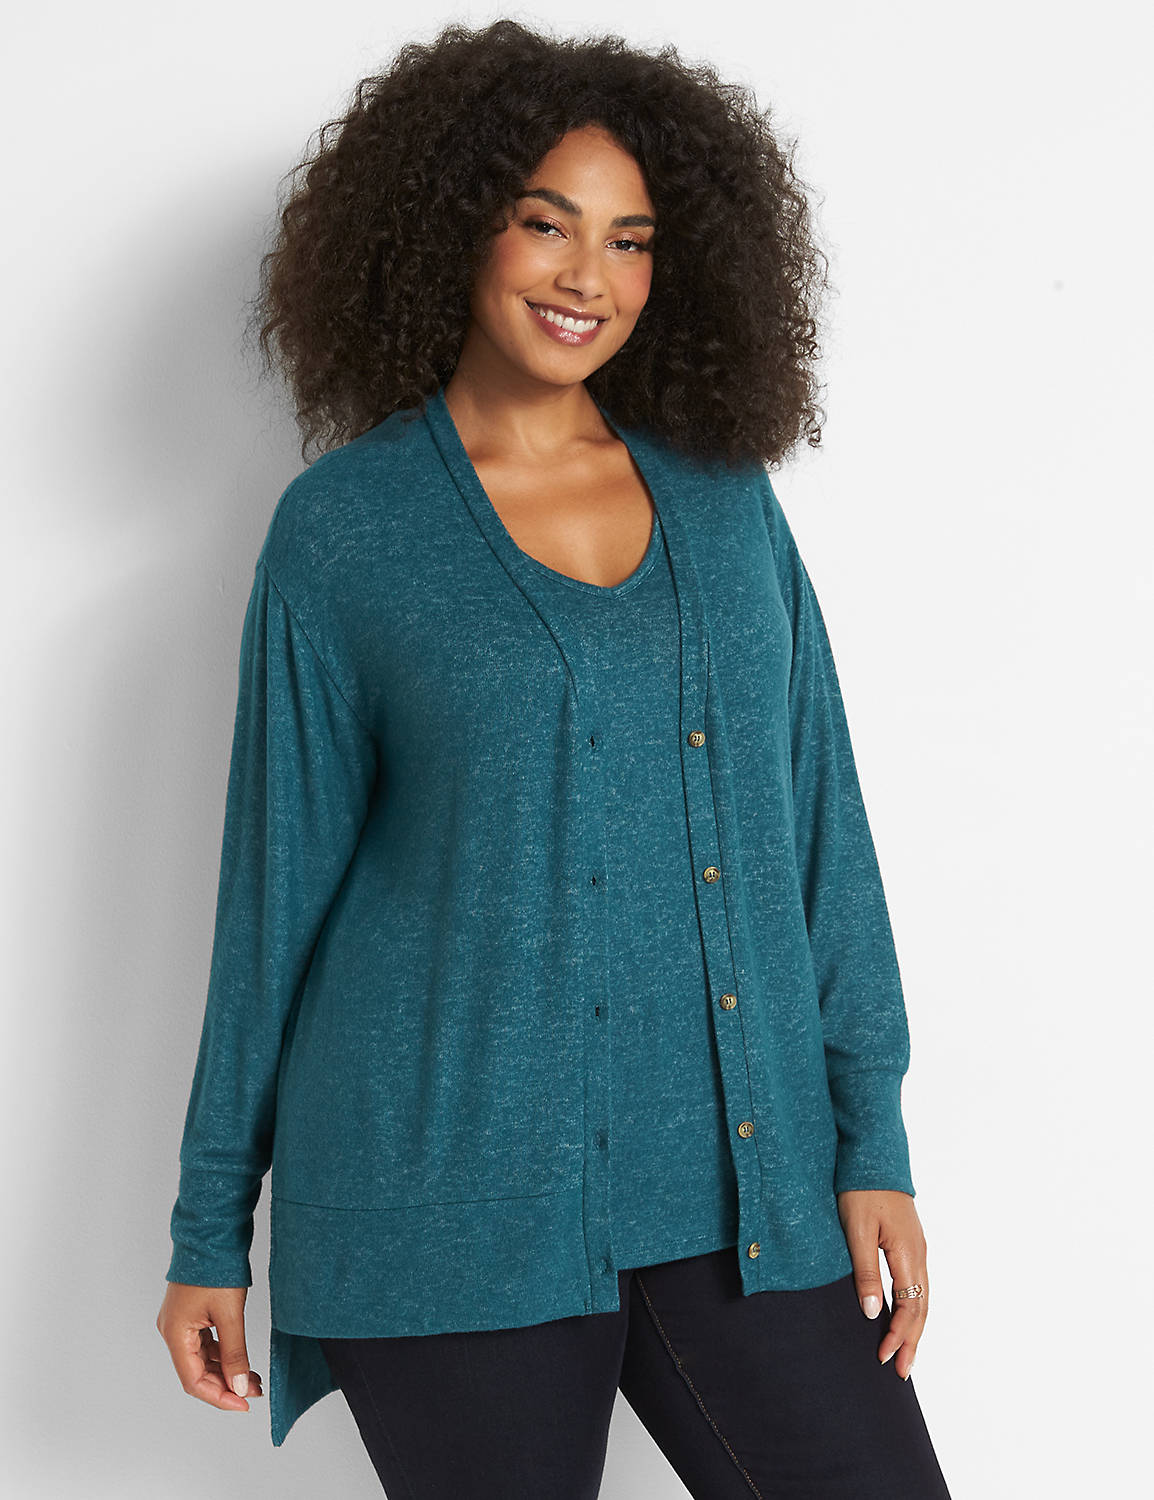 Long Sleeve Button Front Side Slit Over Piece 1124649:PANTONE Deep Teal:10/12 Product Image 1